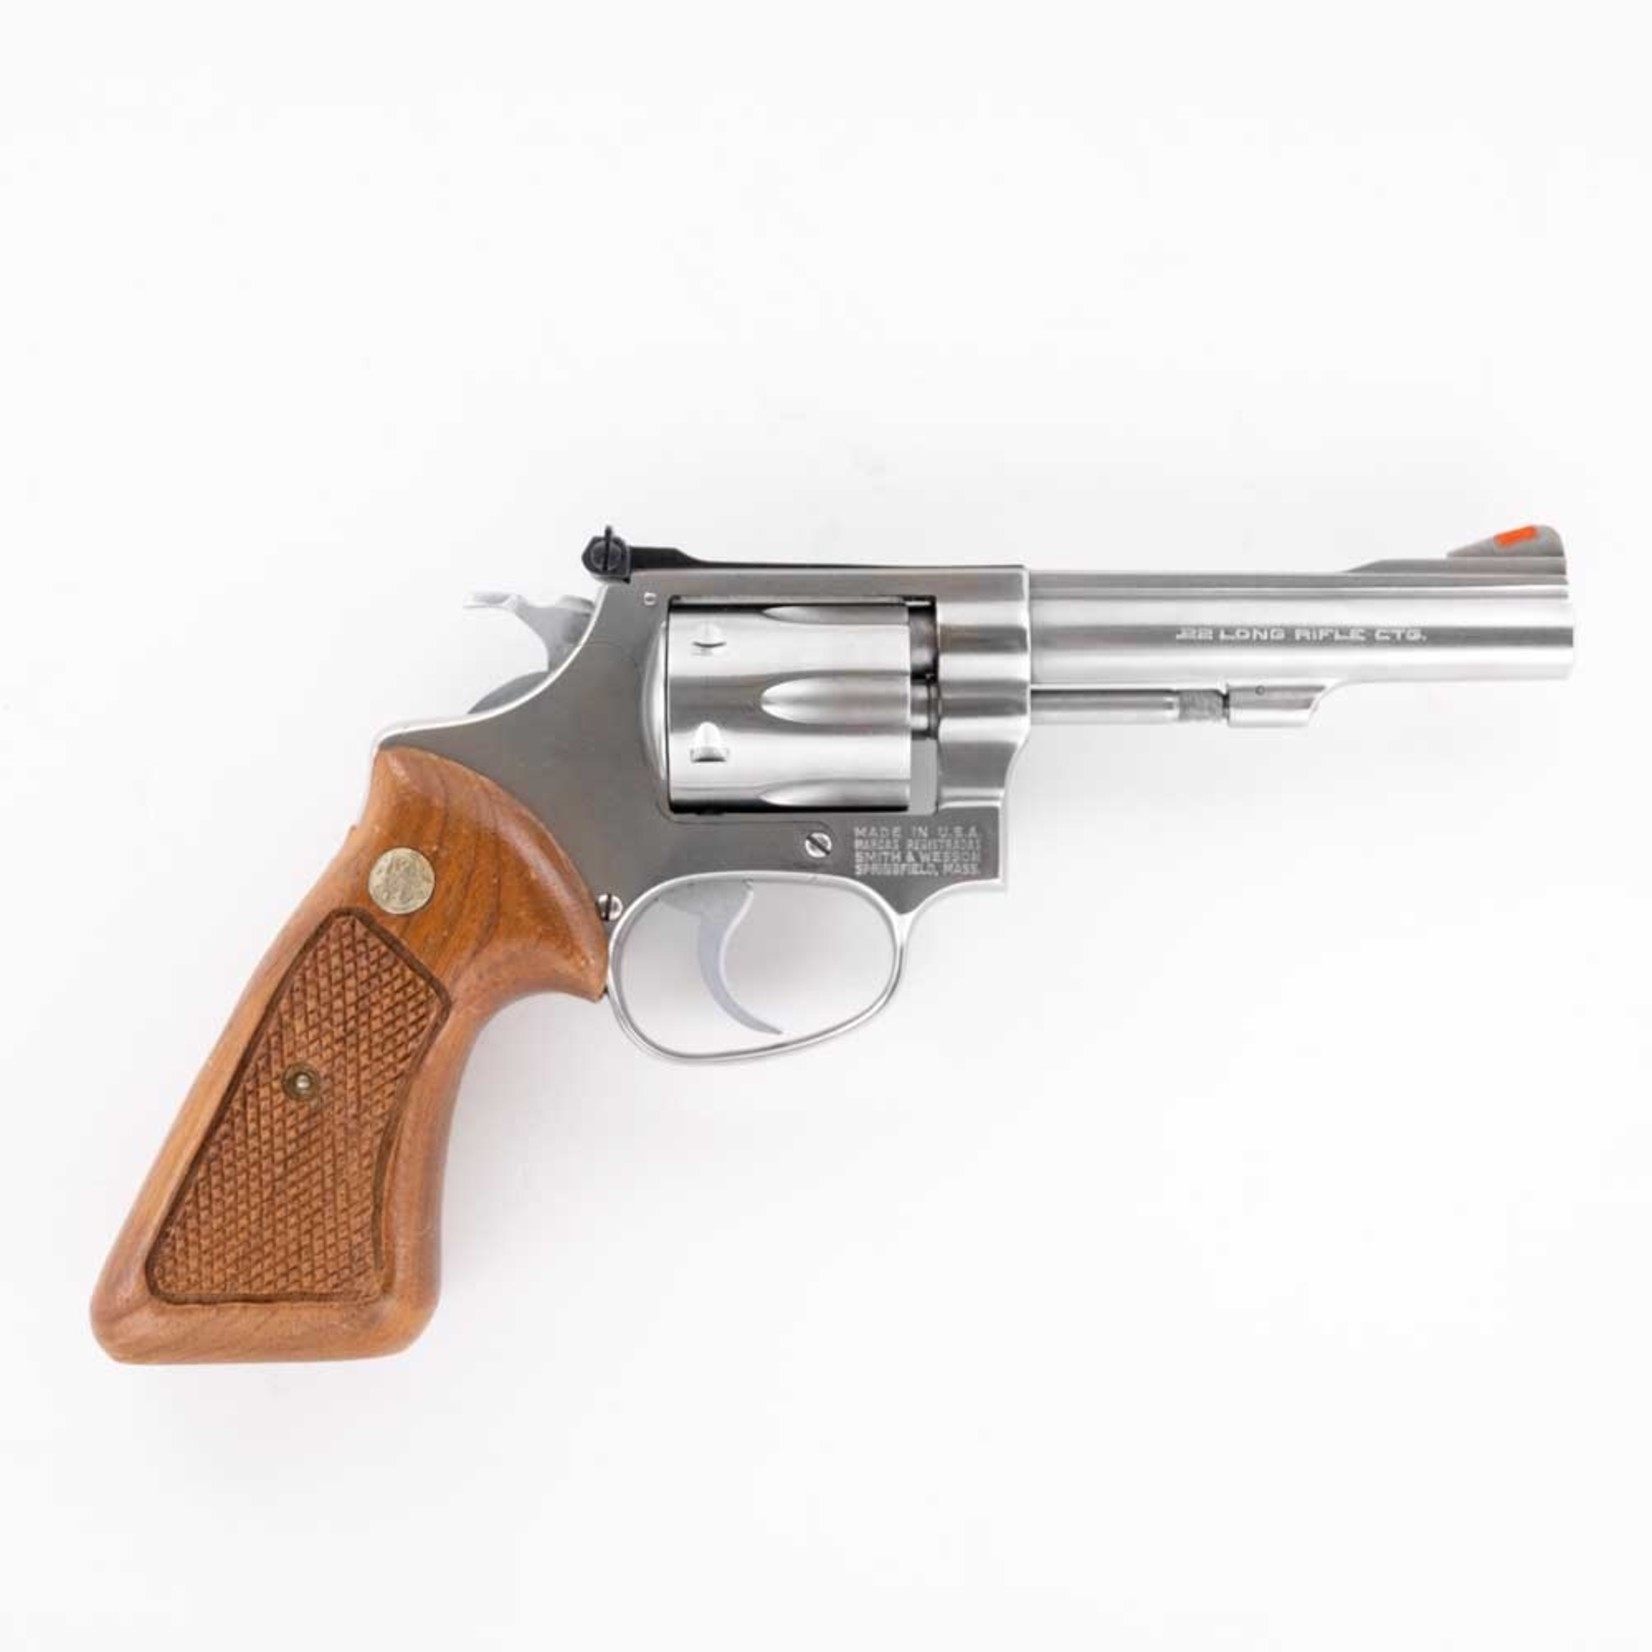 Smith and Wesson Smith & Wesson Model 63, .22LR Target Grip